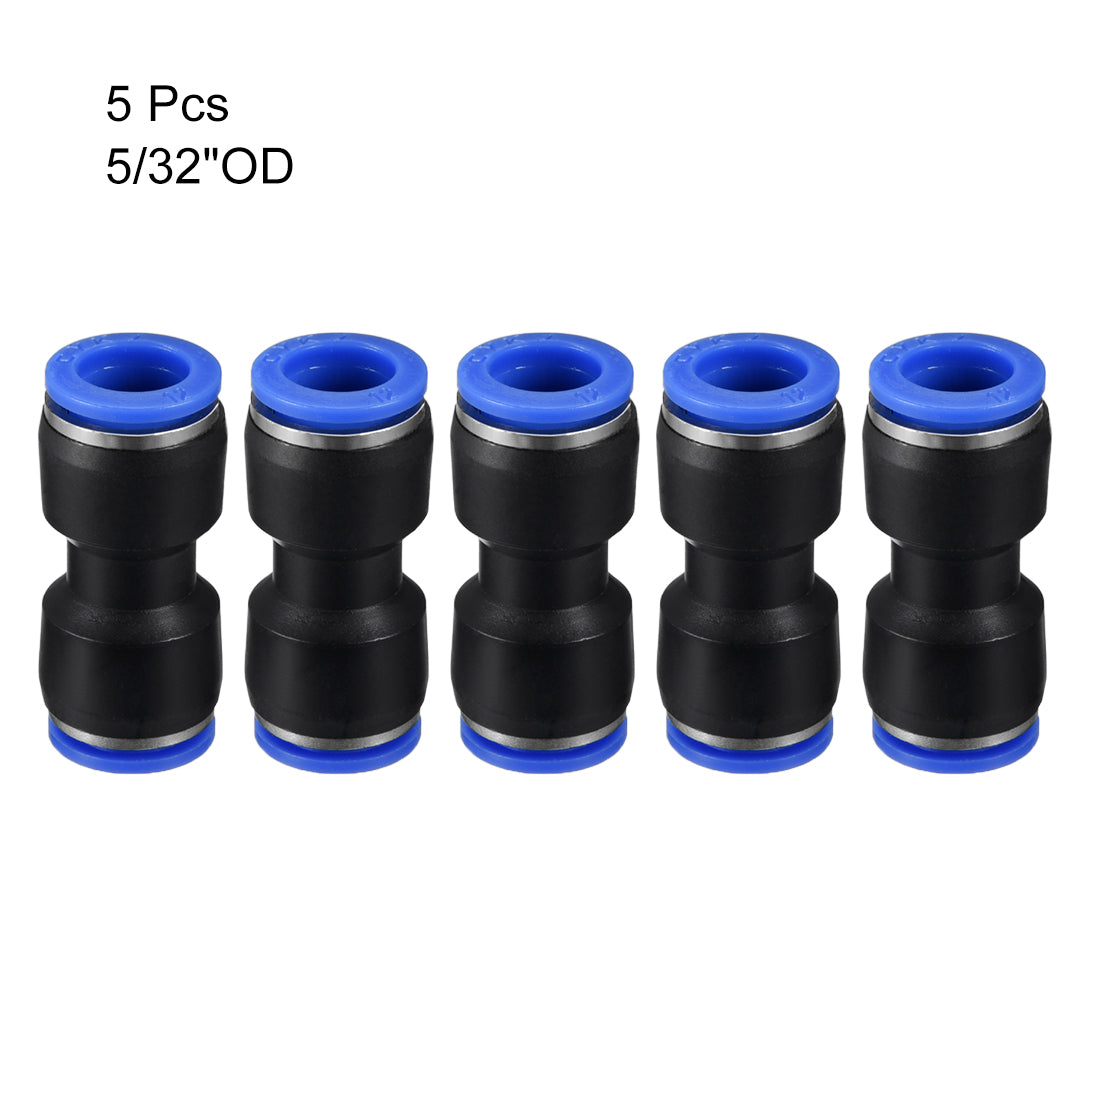 Uxcell Uxcell 4pcs Push to Connect Fittings Tube Connect  16mm or 5/8" Straight OD Push Fit Fittings Tube Fittings Push Lock Blue